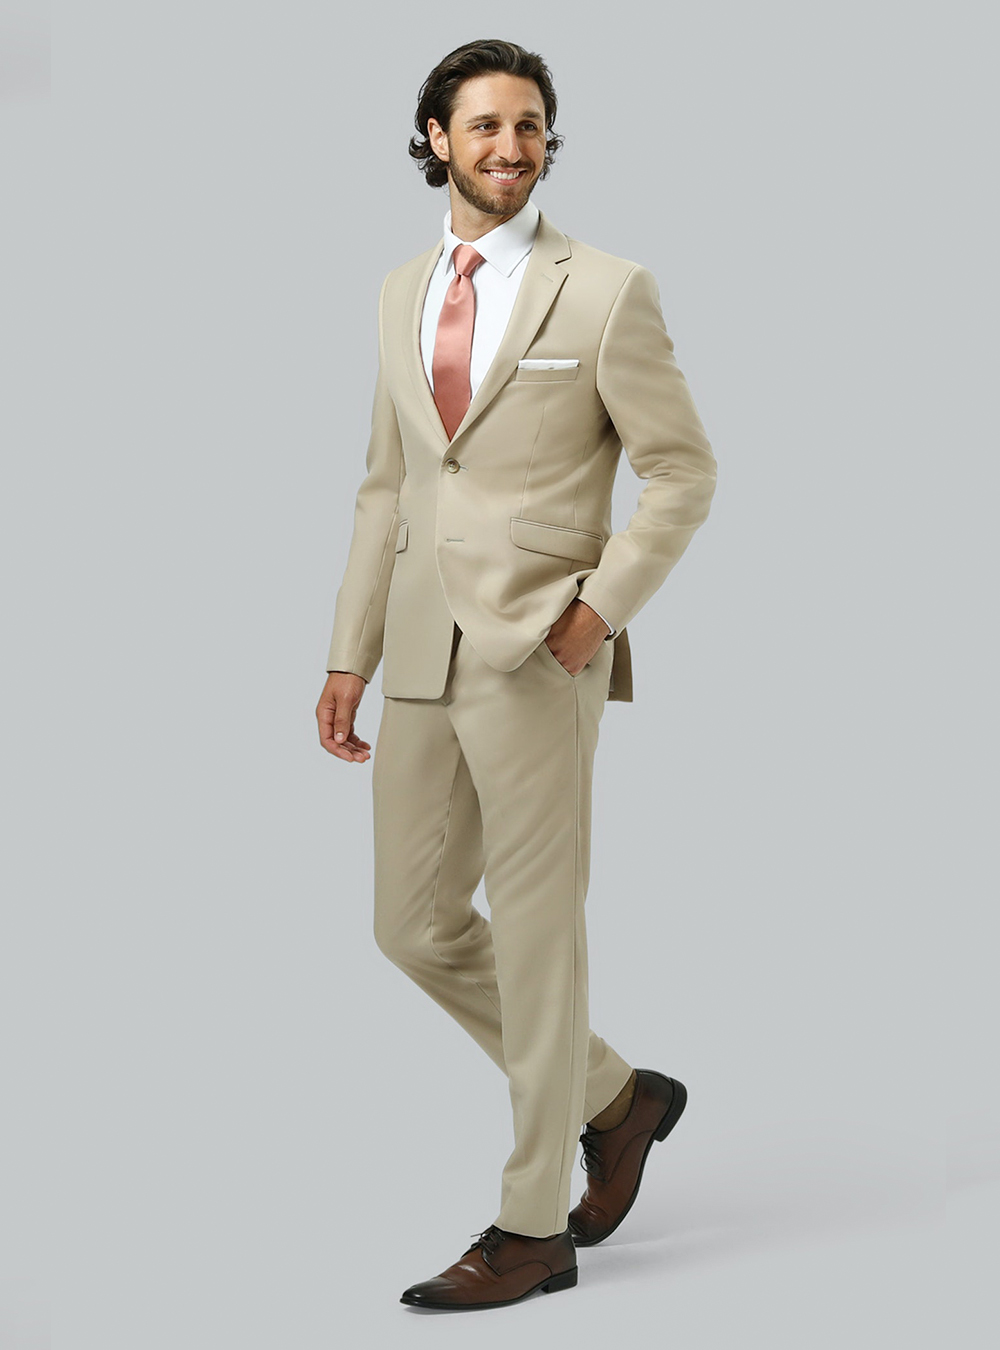 Tan suit, white dress shirt, pink tie and dark brown derby shoes